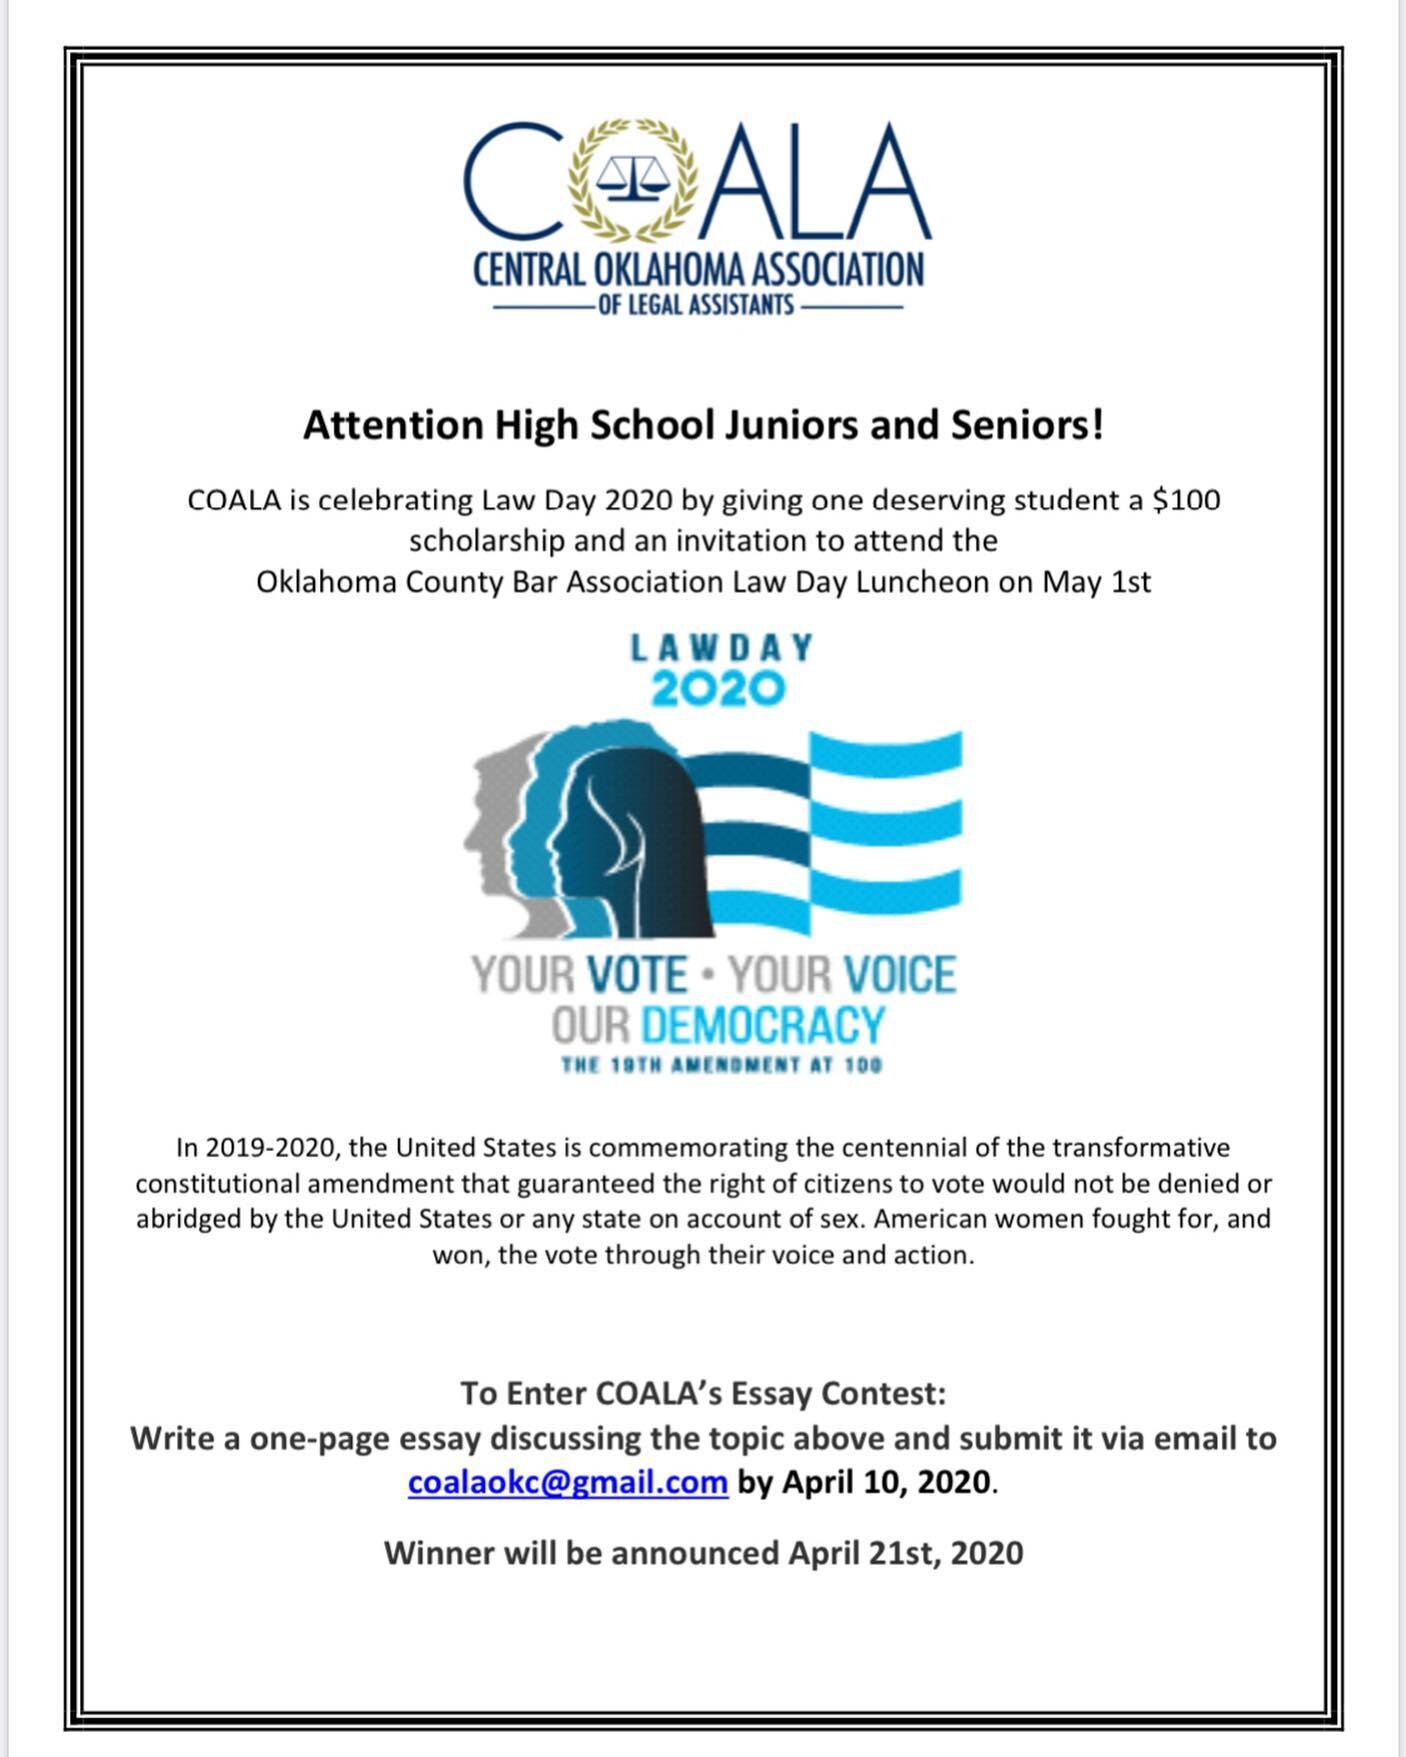 || Law Day is Friday, May 1st || COALA is celebrating by awarding one high school junior or senior with a $100 scholarship and invitation to the Oklahoma County Bar Association luncheon! 
Do you know someone who is interested in the legal field and c